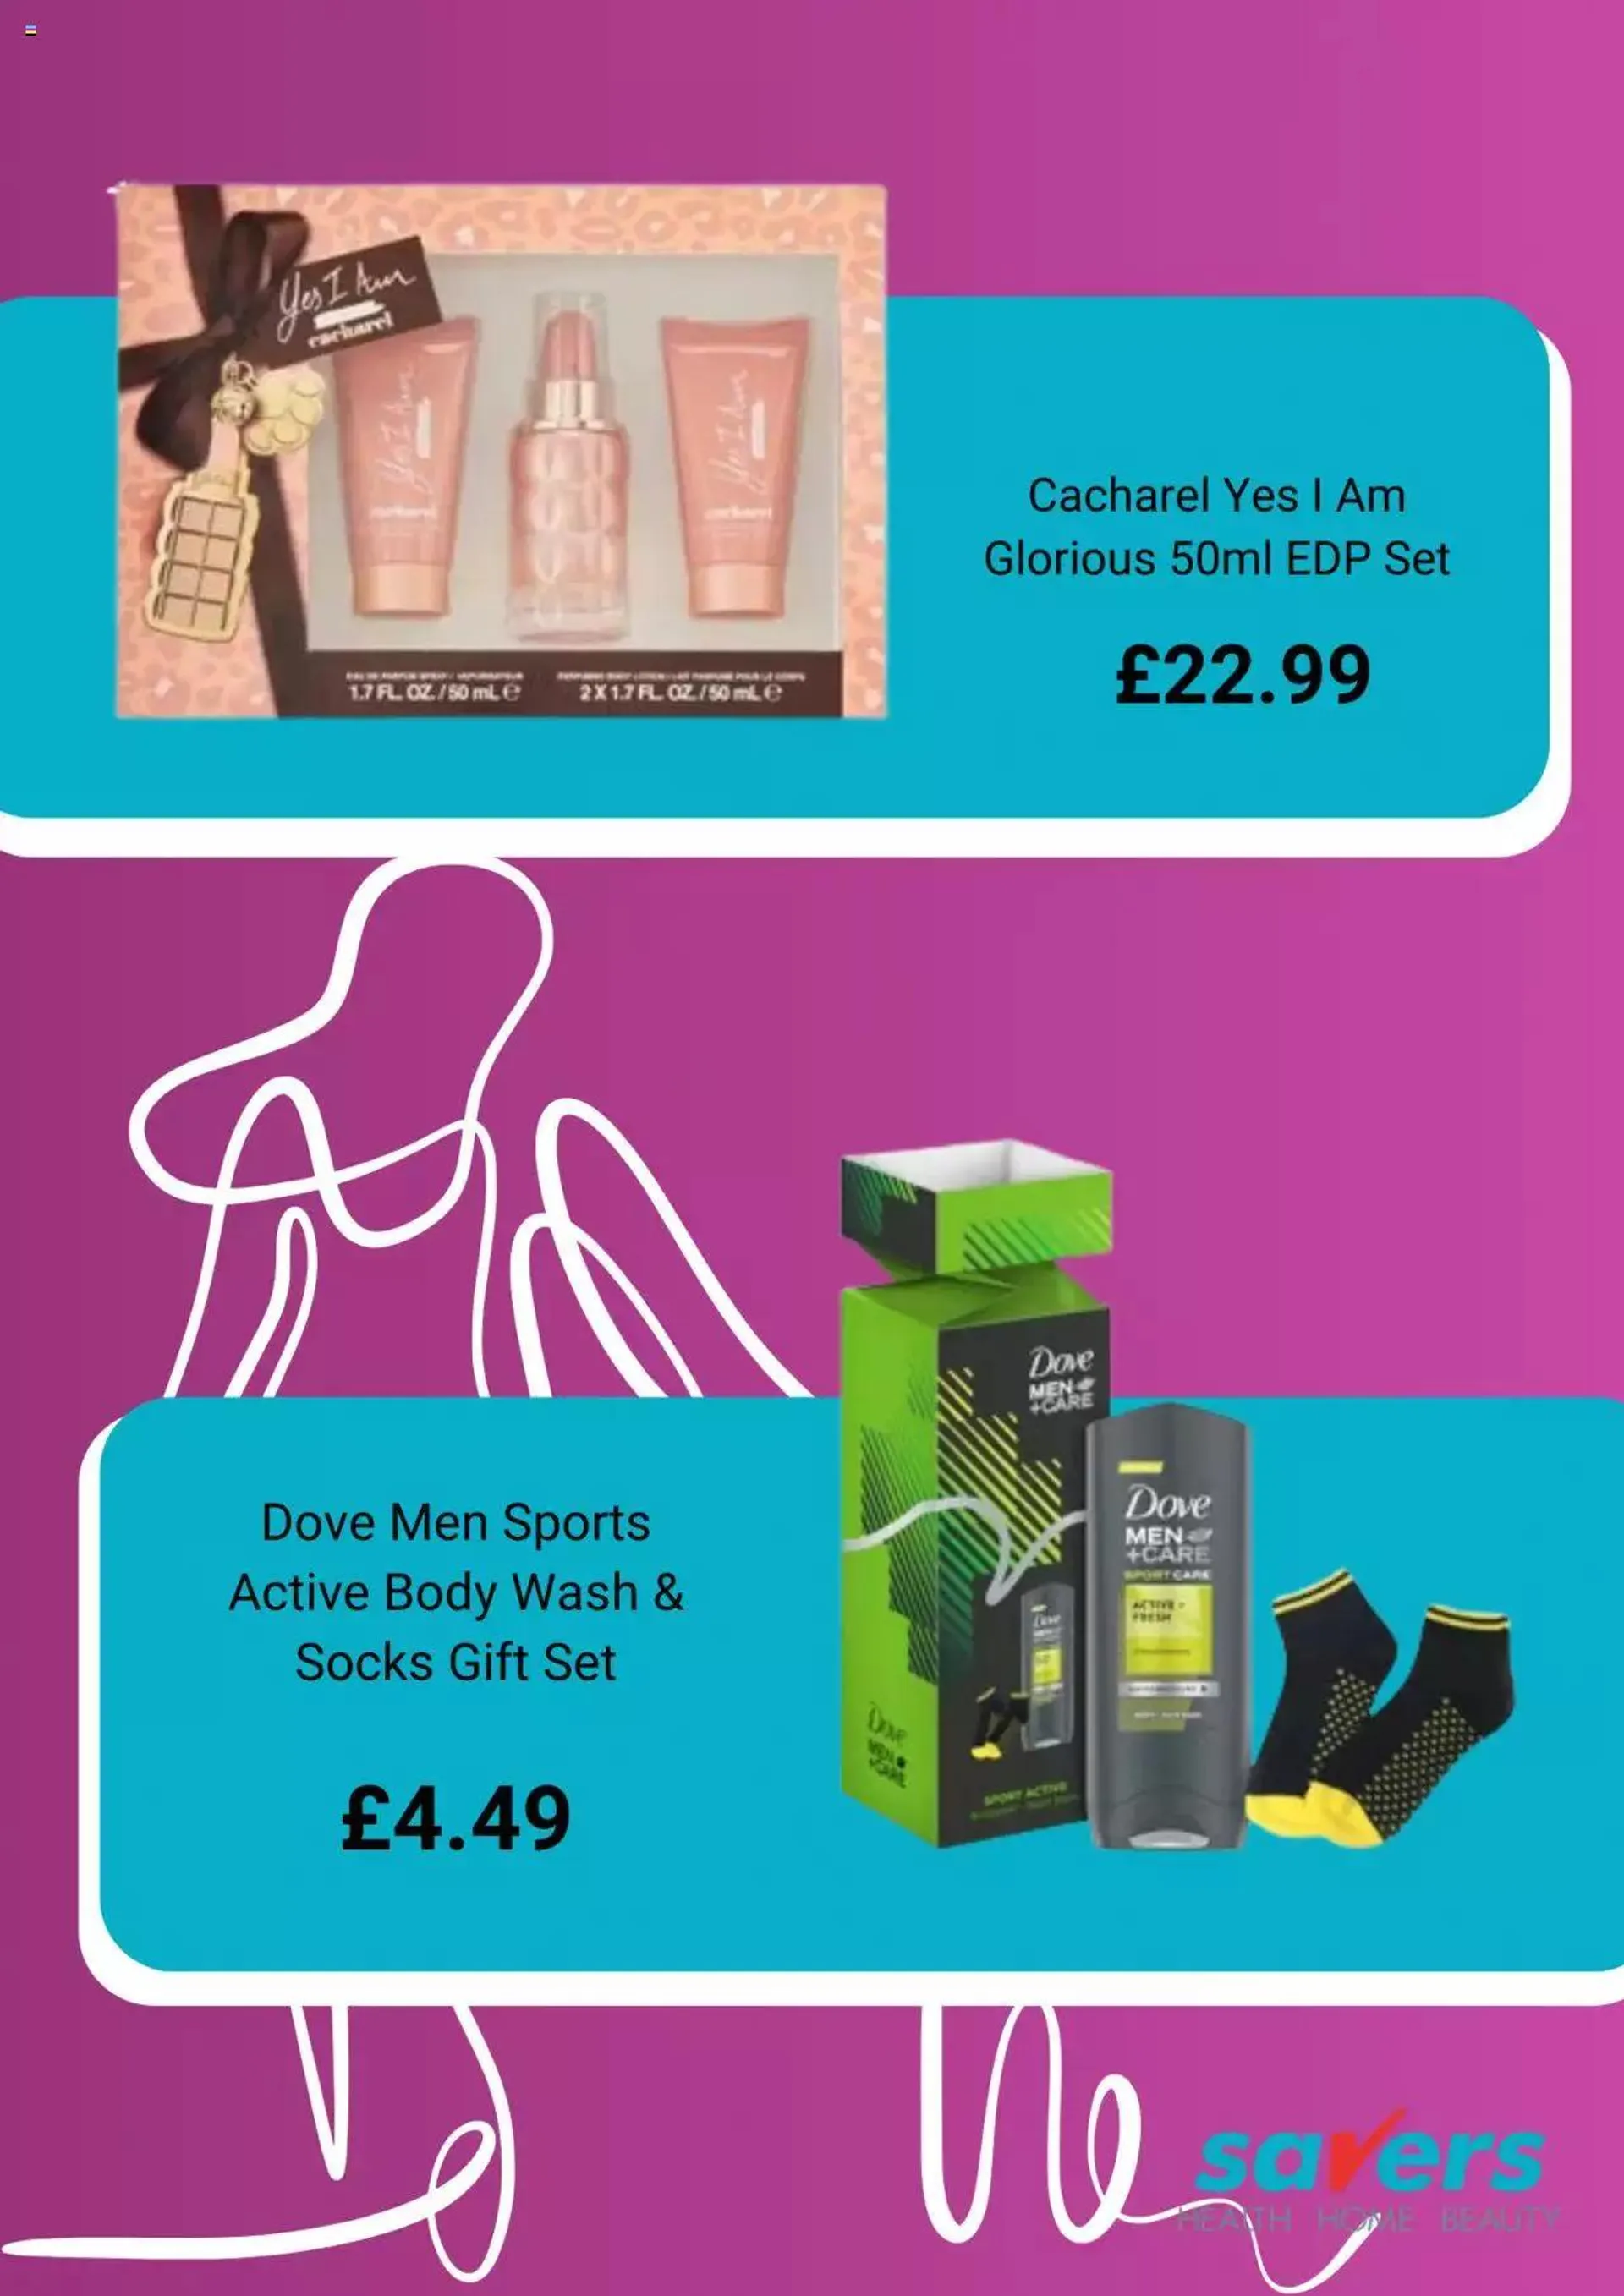 Savers - Offers from 19 February to 22 February 2024 - Catalogue Page 5